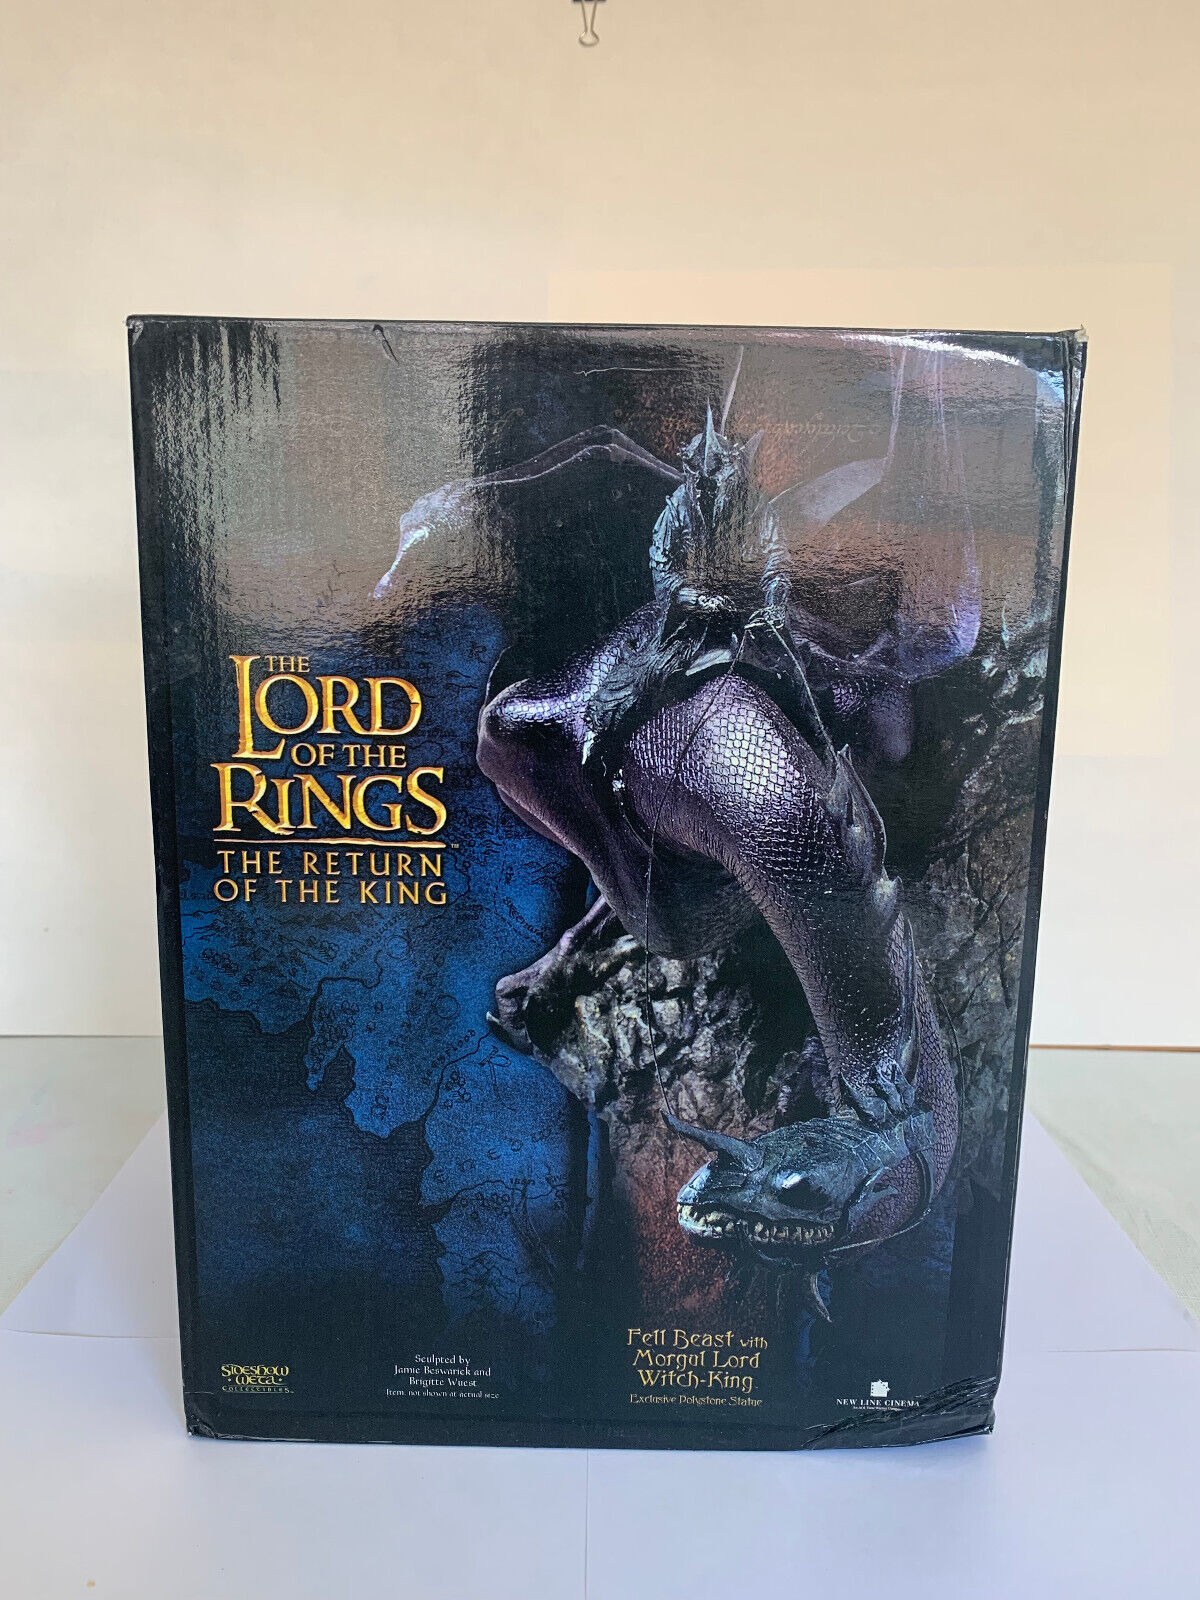 Sideshow Weta Statue Fell Beast with Morgul Lord Witch-King LOTR – Please Read